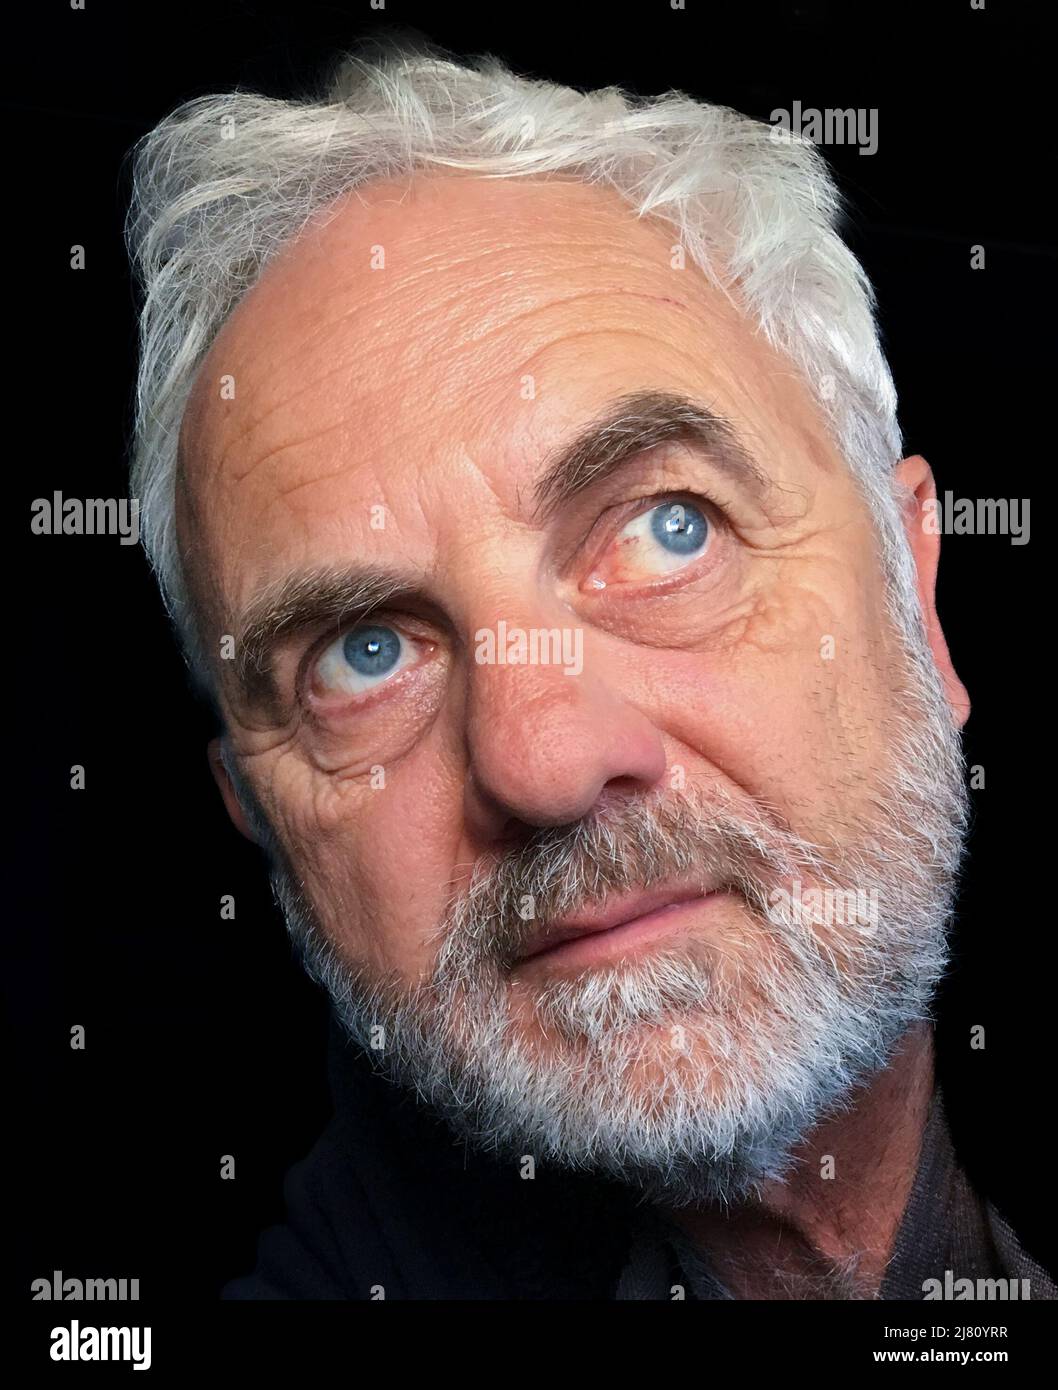 Portrait of a senior man with grey hair and a beard Stock Photo